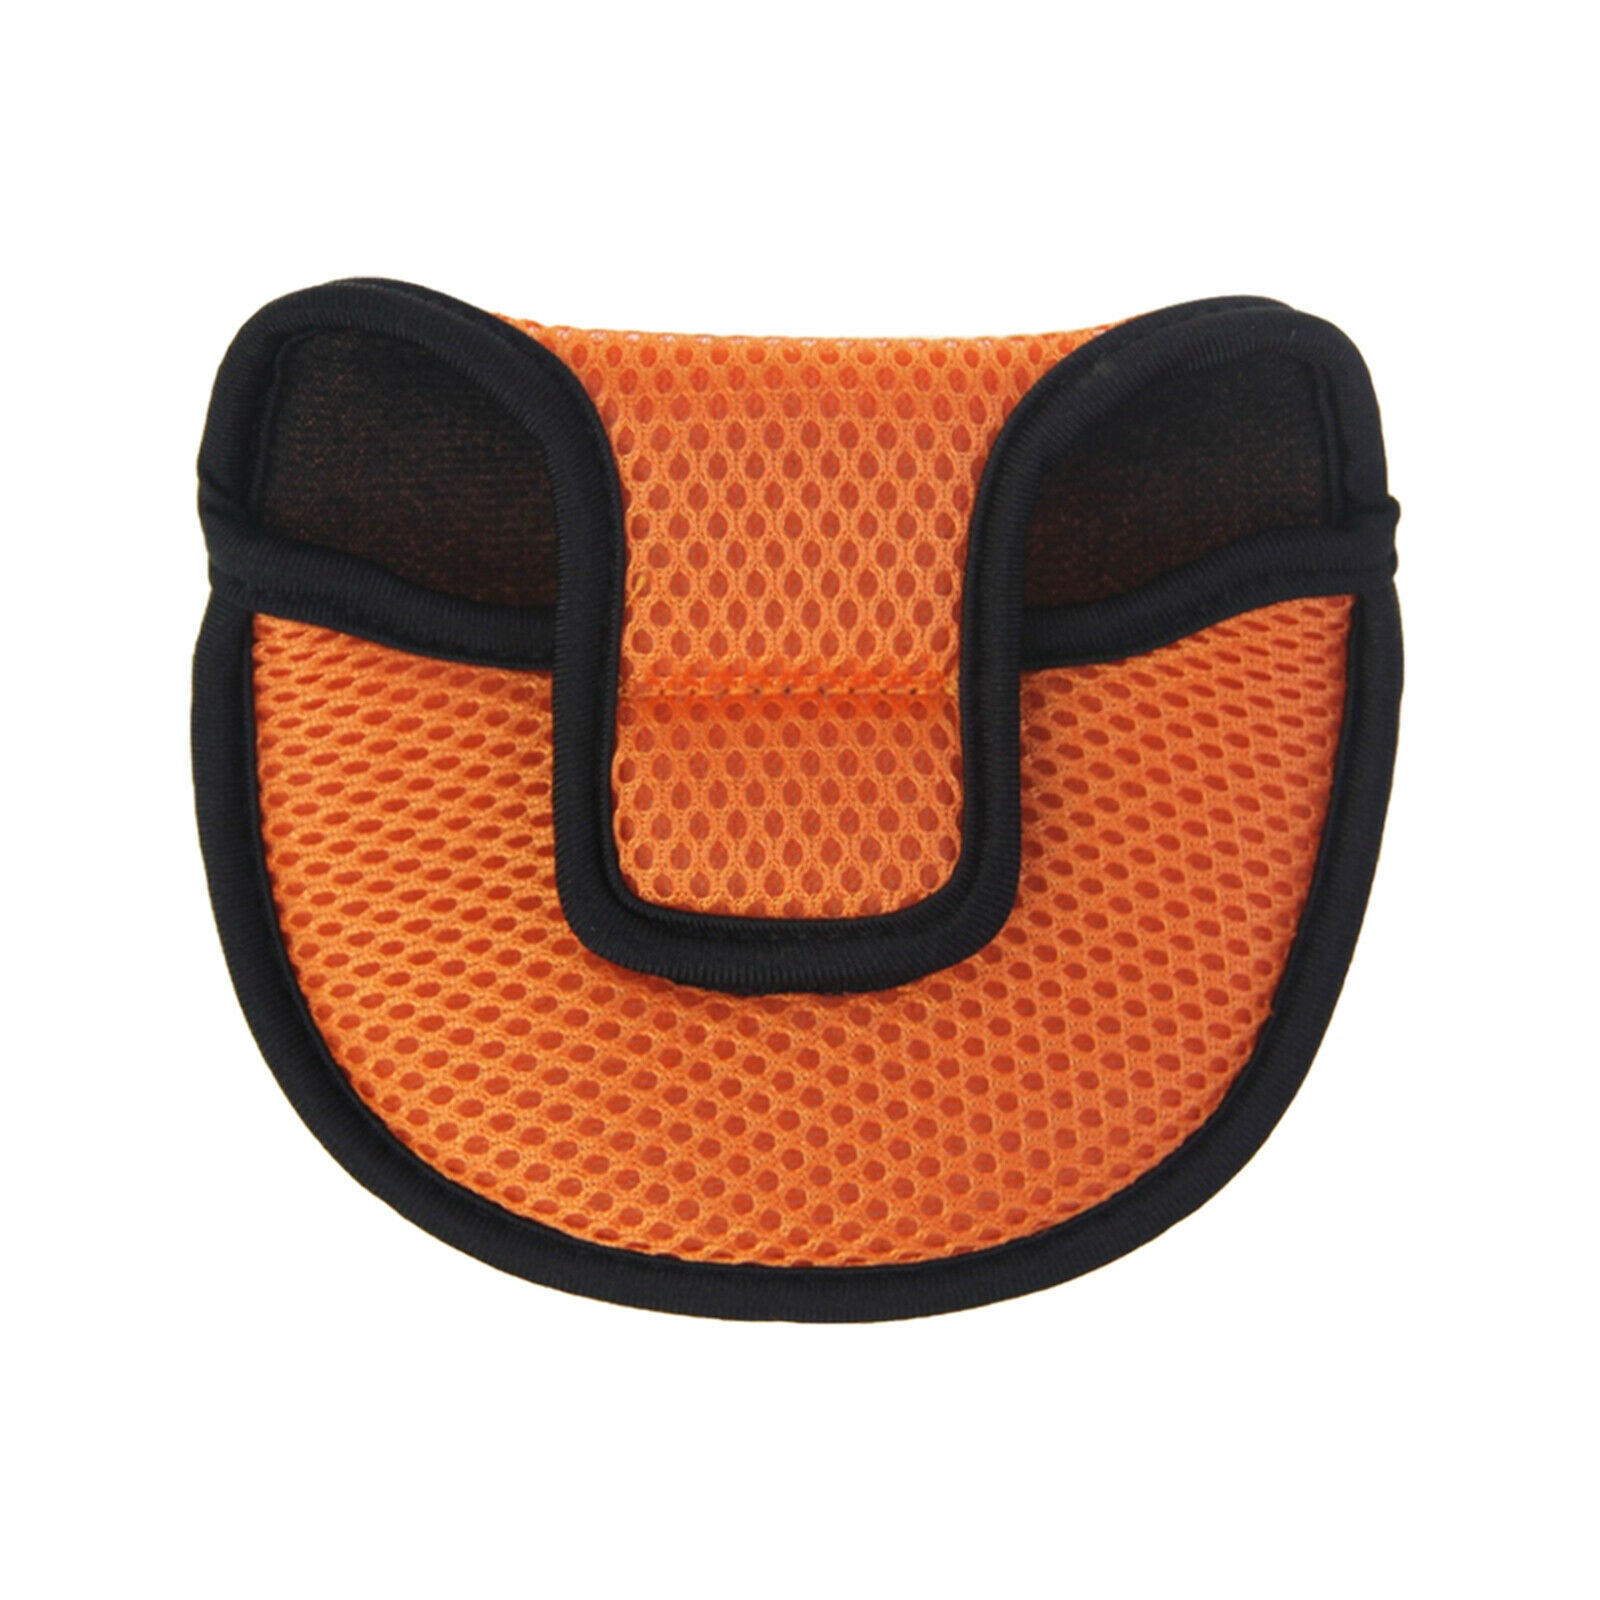 Golf Mallet Putter Head Cover Protector Headcover Fits All Brands Orange